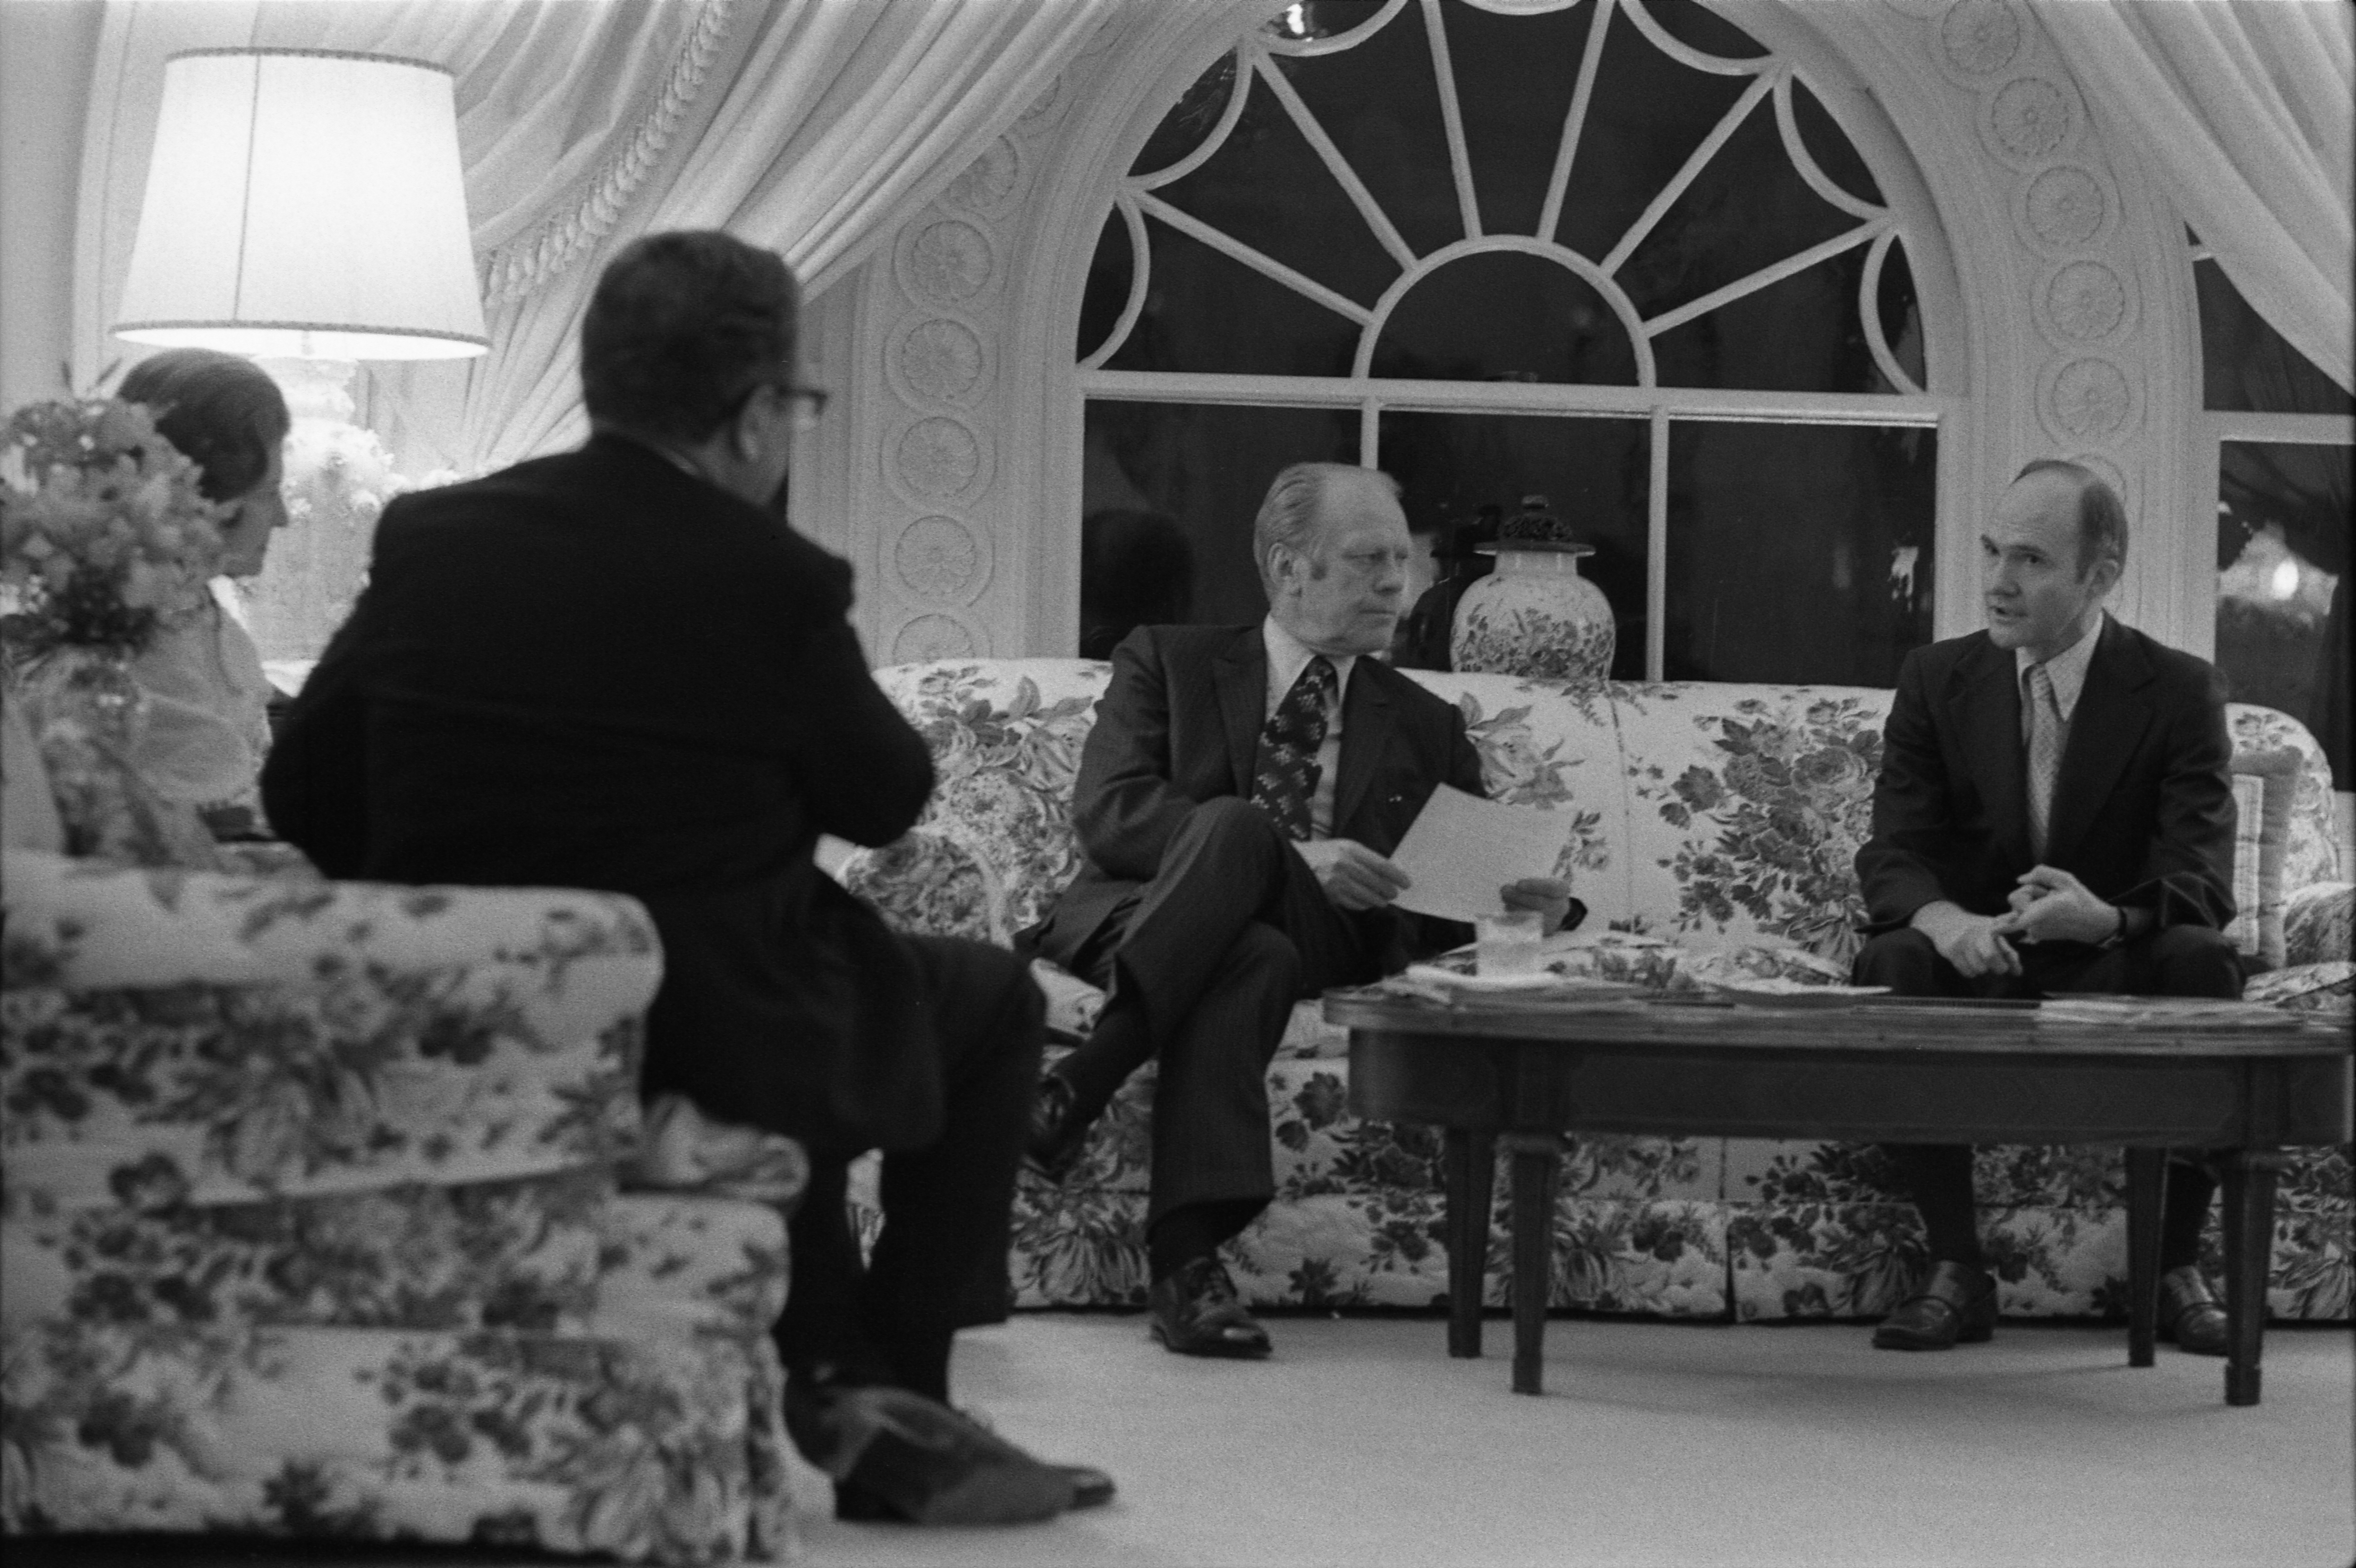 President Ford discusses the evacuation of Saigon with Secretary of State Henry Kissinger and his Deputy Assistant for National Security Affairs Brent Scowcroft during a late night meeting in the White House residence.